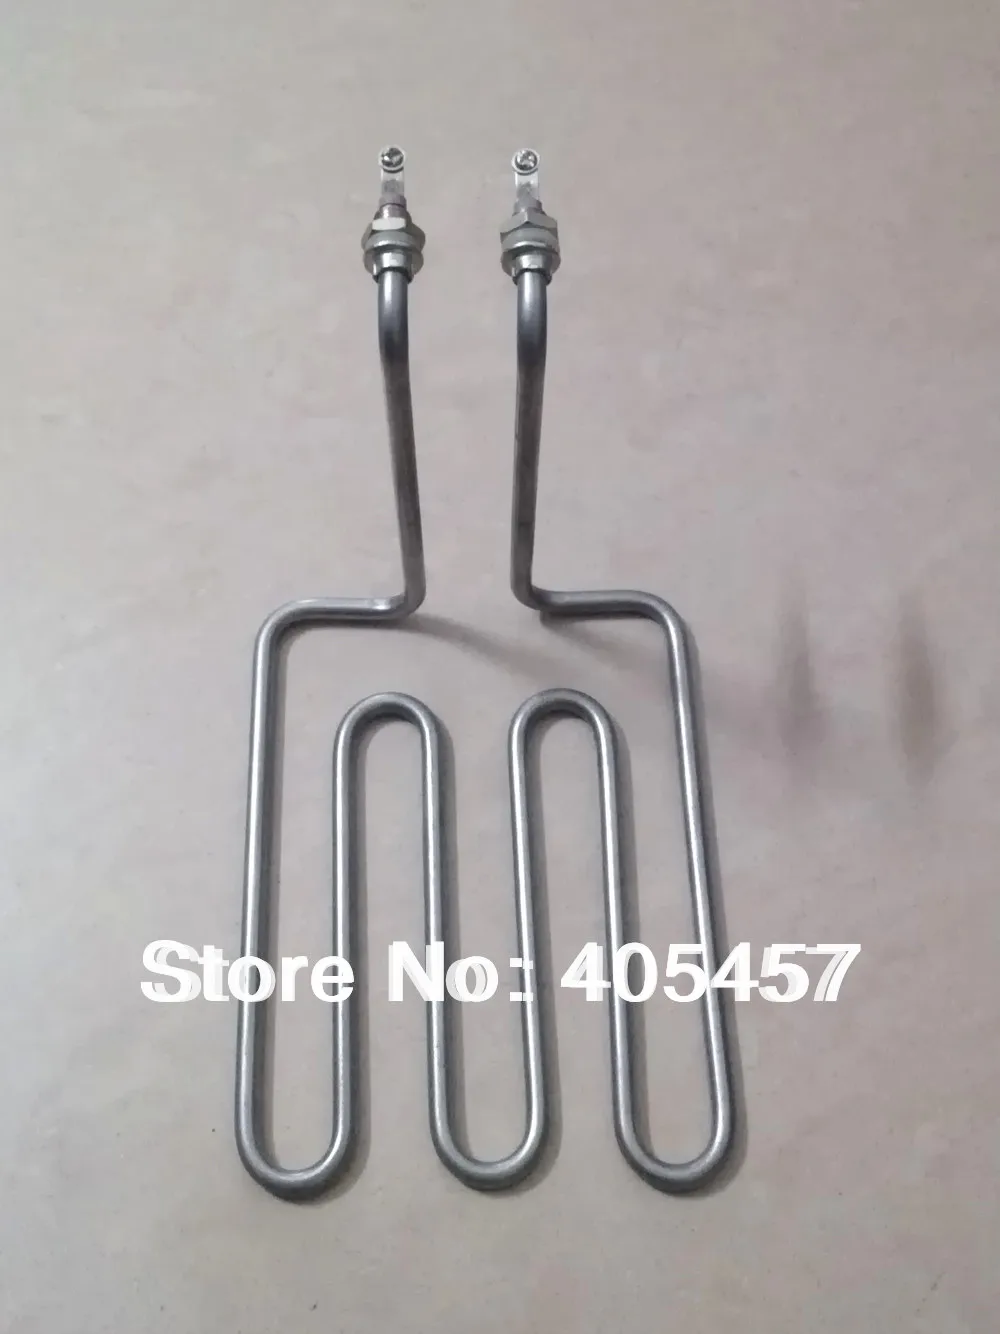 2500W fryer tube,heating tube,8mm heating pipe,3U stainless steel heating element,electrical parts,heater element